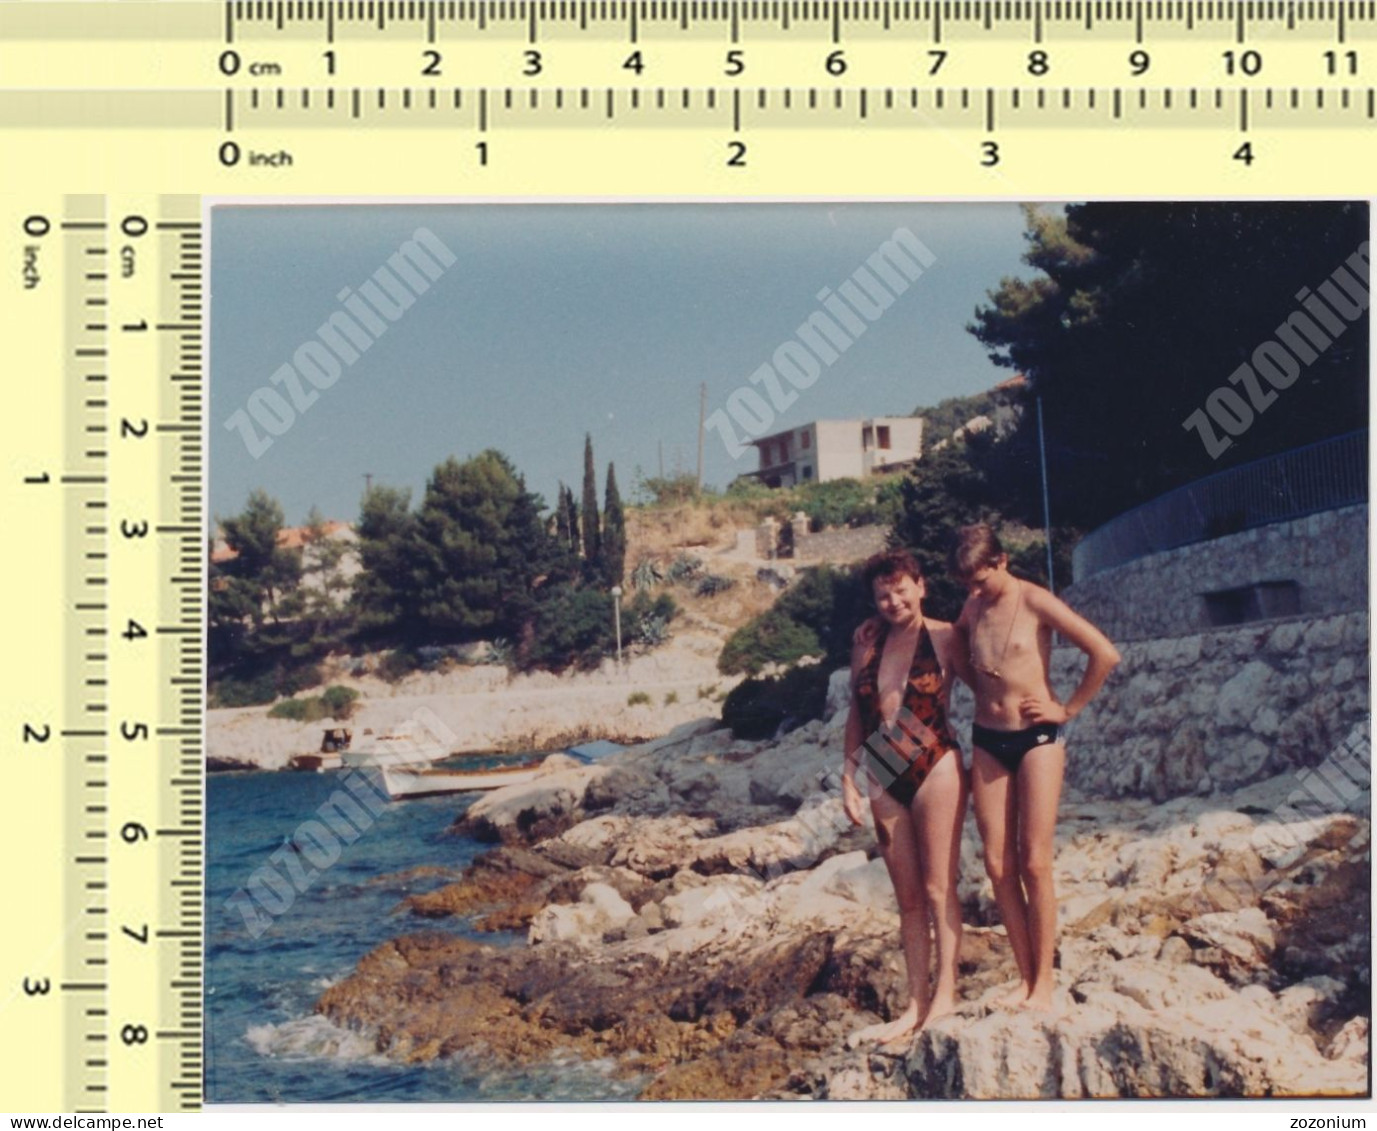 REAL PHOTO, Swimsuit Woman And Boy On Beach Femme Et Garcon Sur Plage Original Snapshot - Anonymous Persons